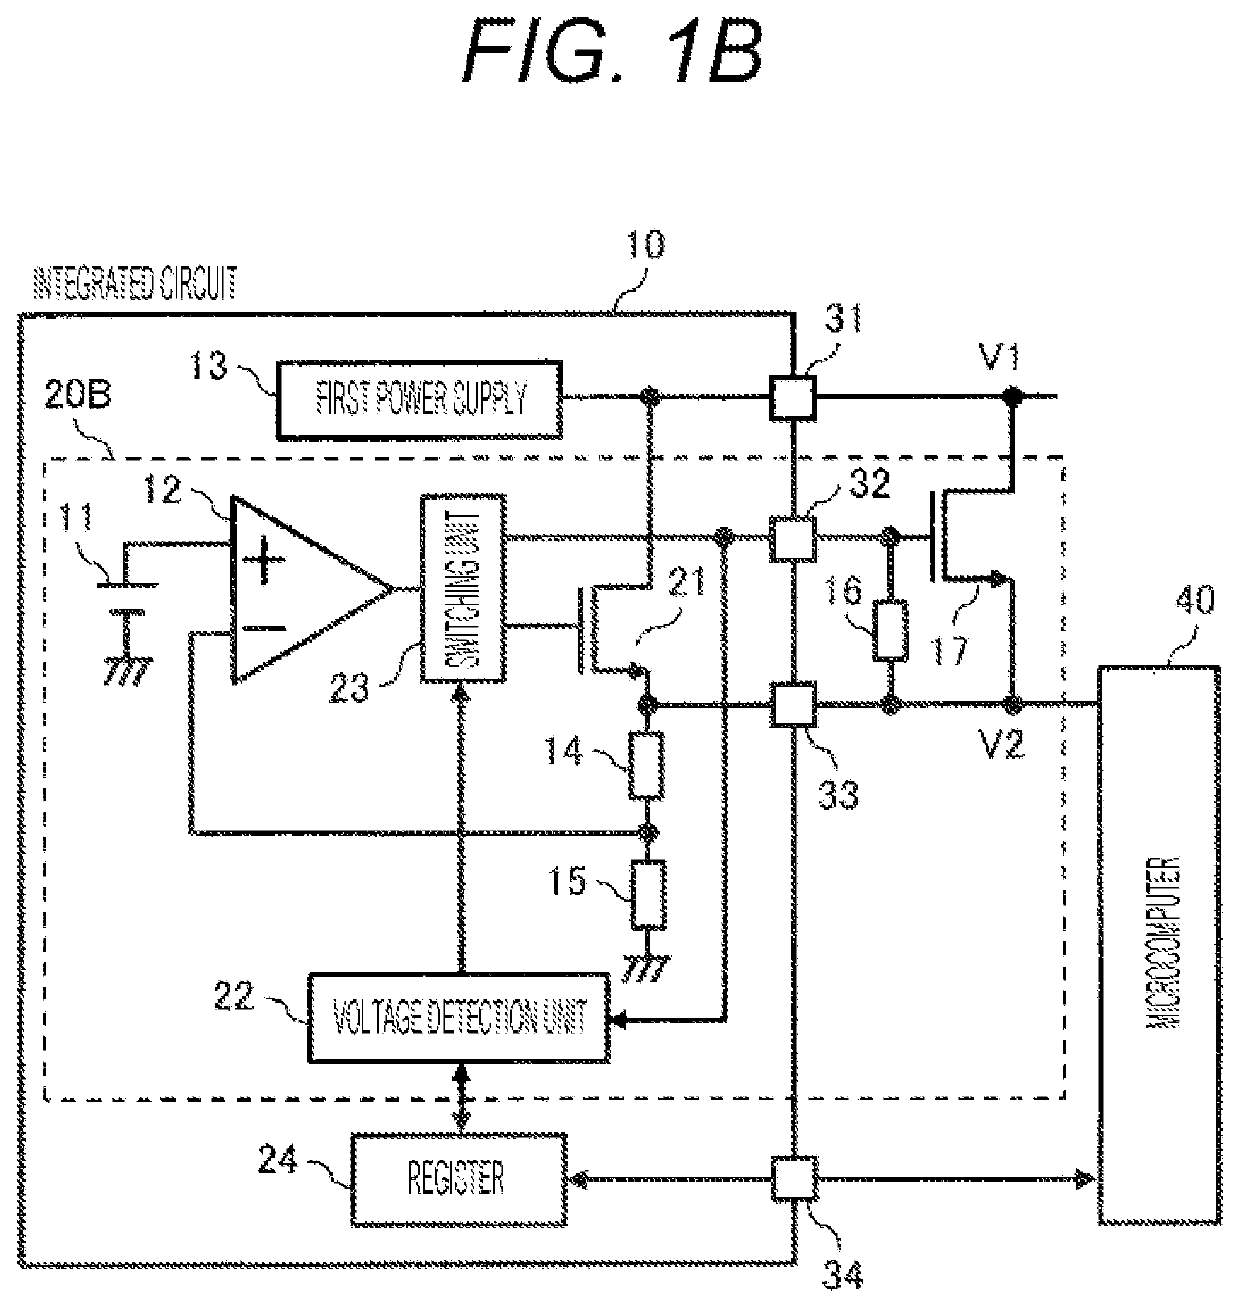 Electronic Control Device